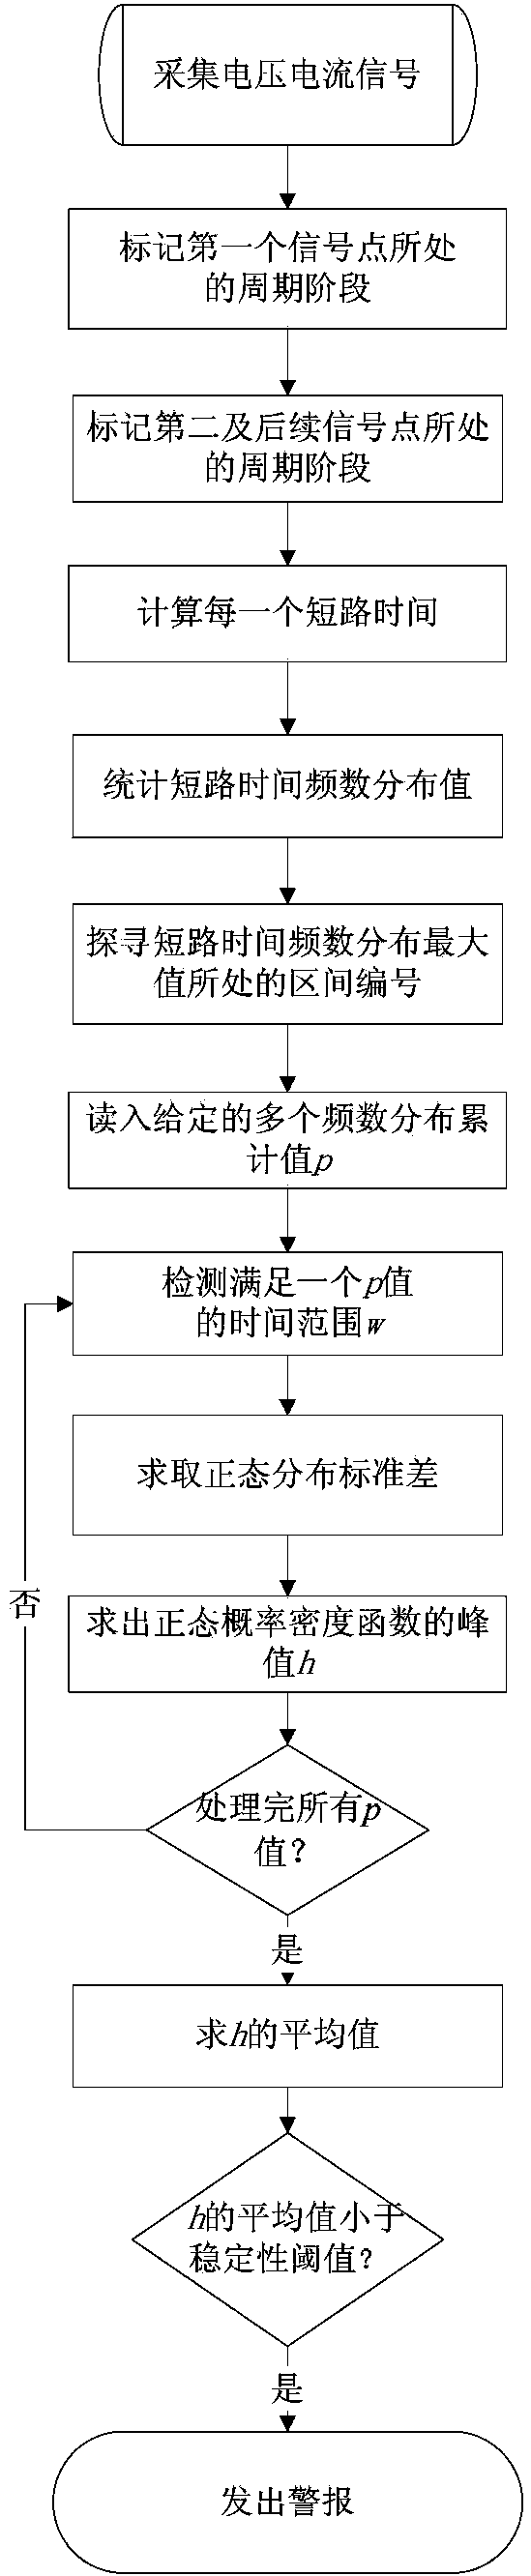 Automatic stability detecting method for process of CO2 electric arc welding short circuit transition welding